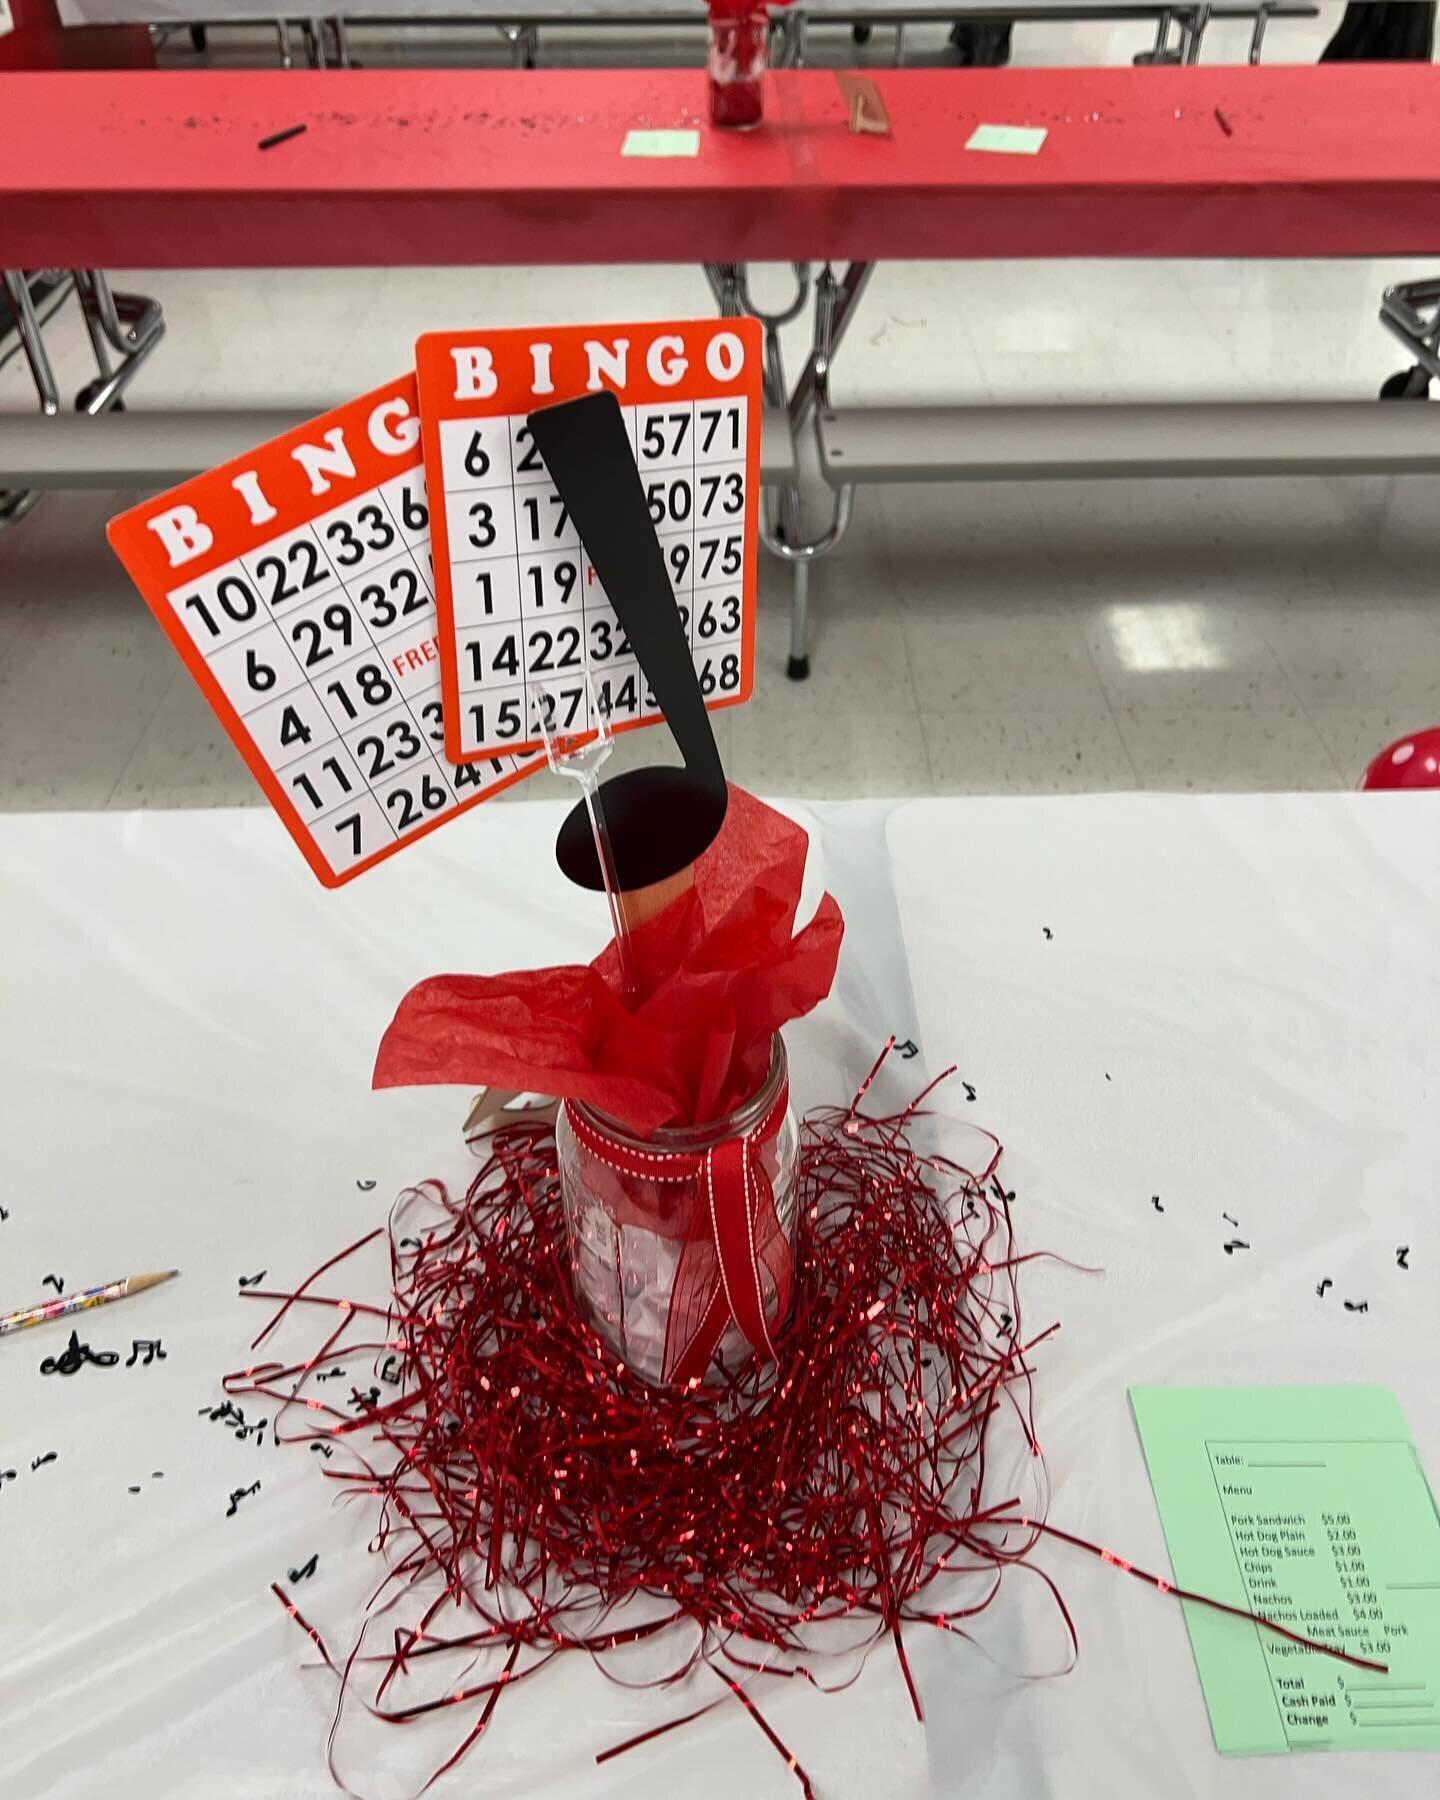 Hello everyone, today is bingo day! Doors open at 4 and the games start at 5 in the PHS Cafeteria. 

These are just a few of our prizes that you could win AND we have cash prices that are $100 or more. There will be food from Boathouse available. Tic